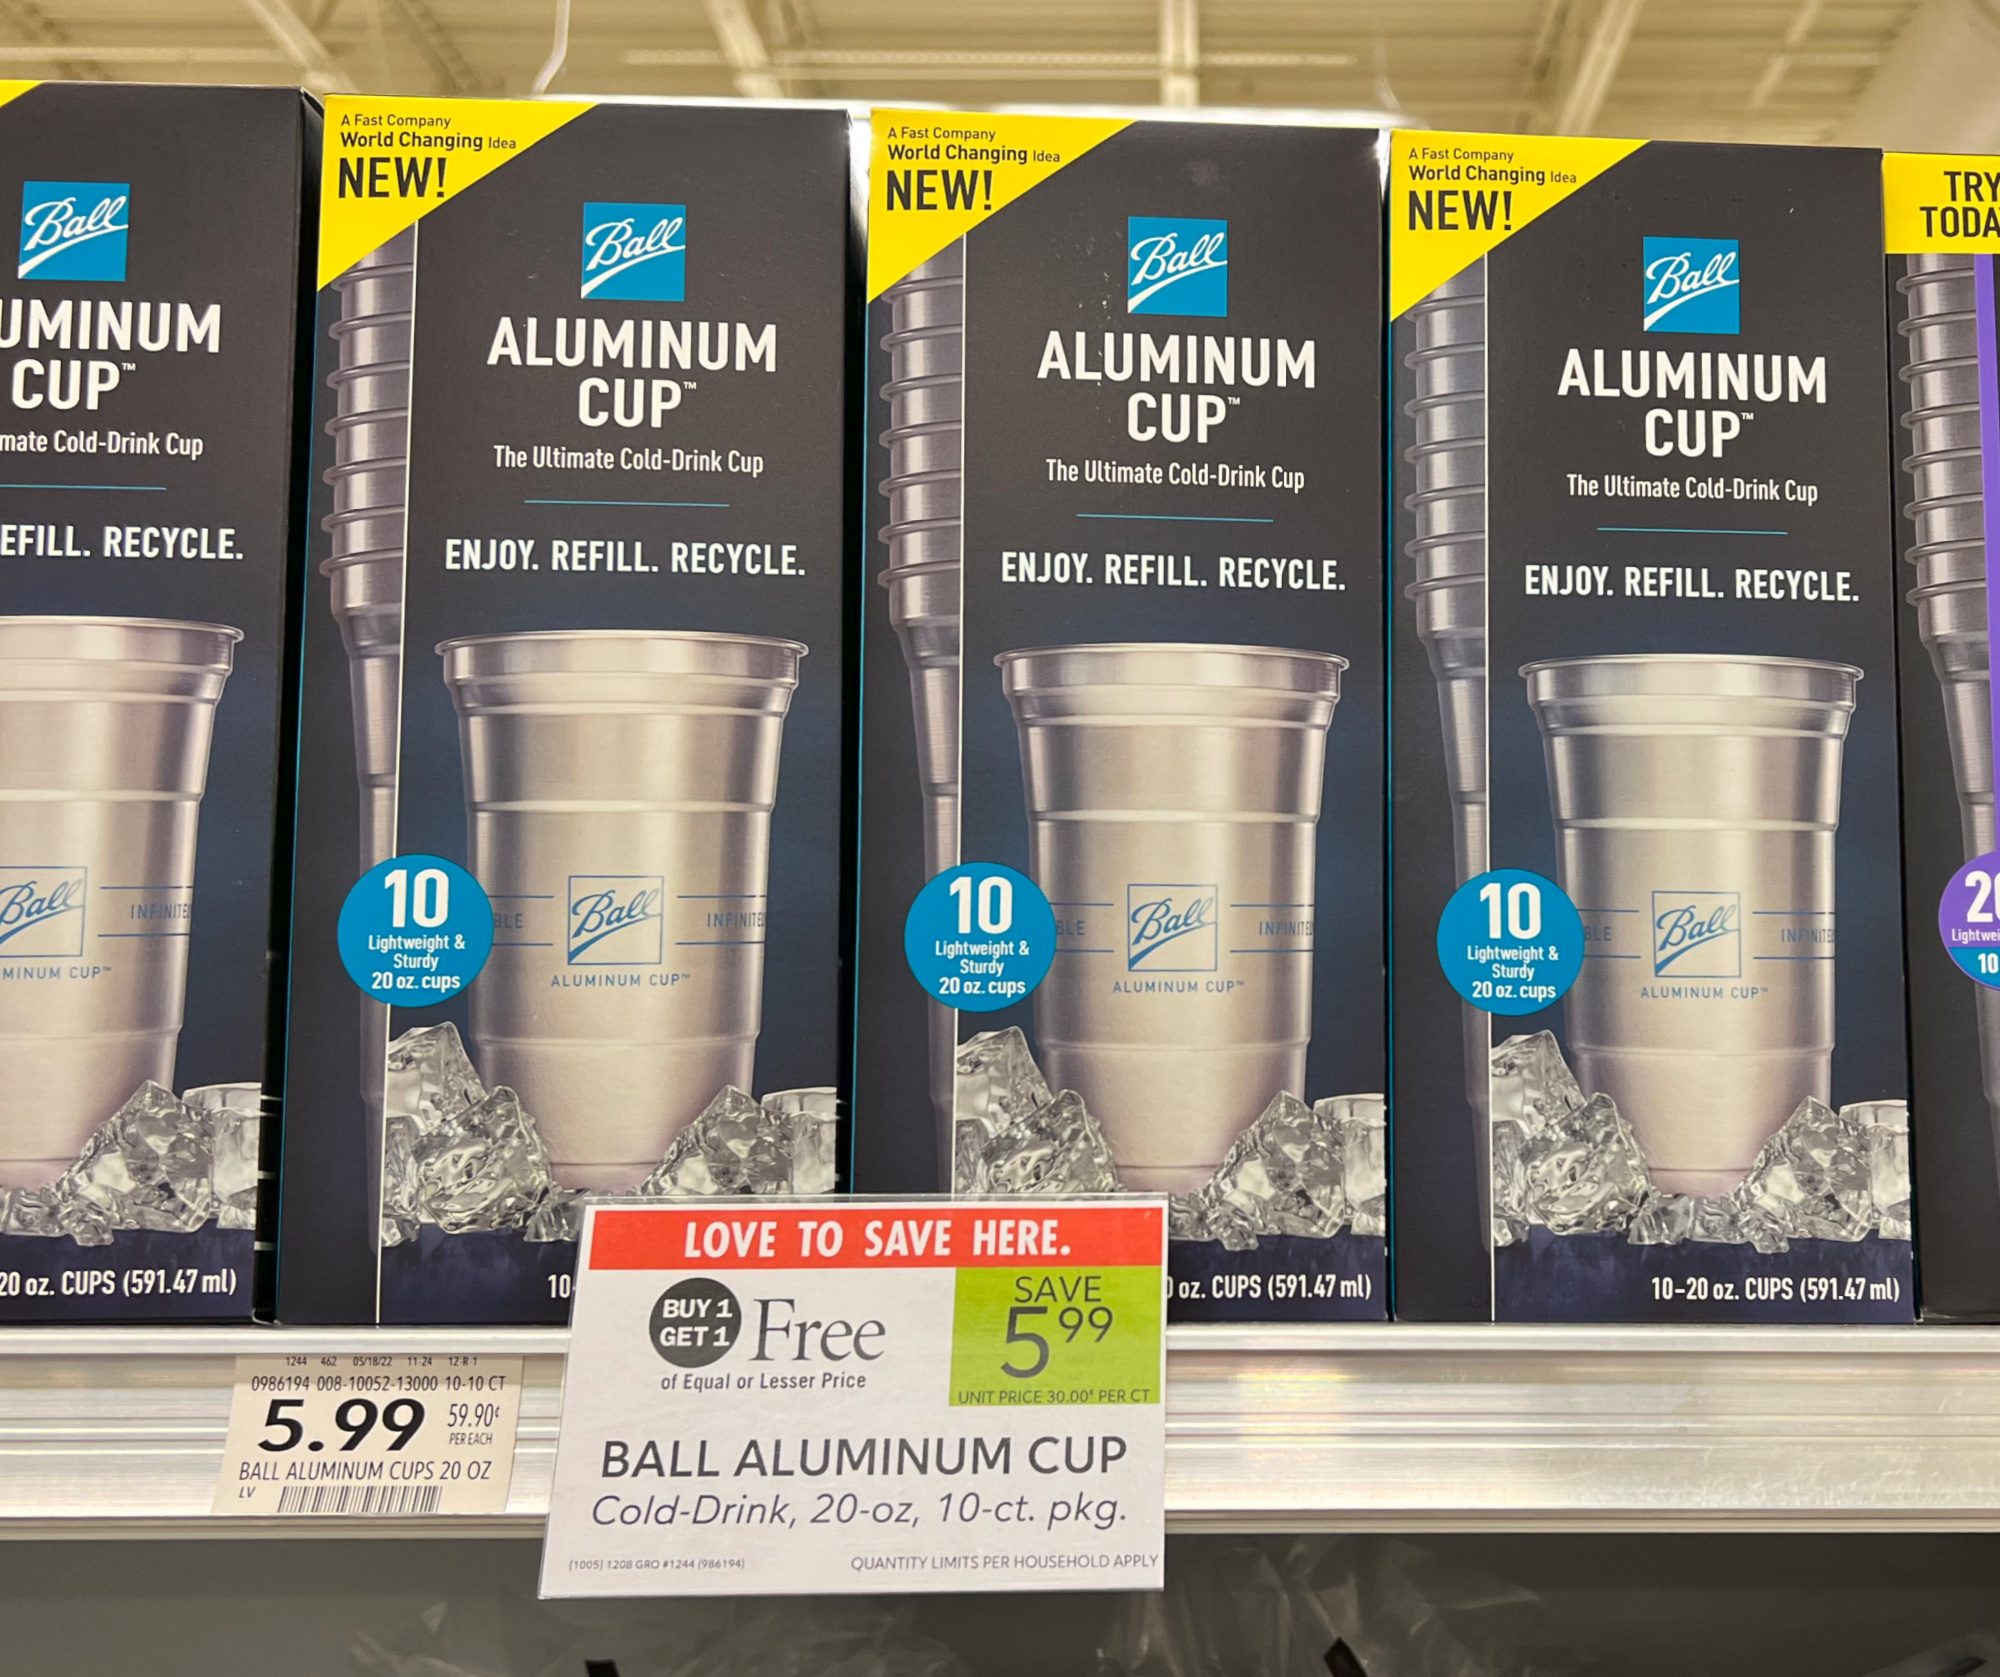 10-Count Packages Of Ball Aluminum Cups Just $2 At Publix